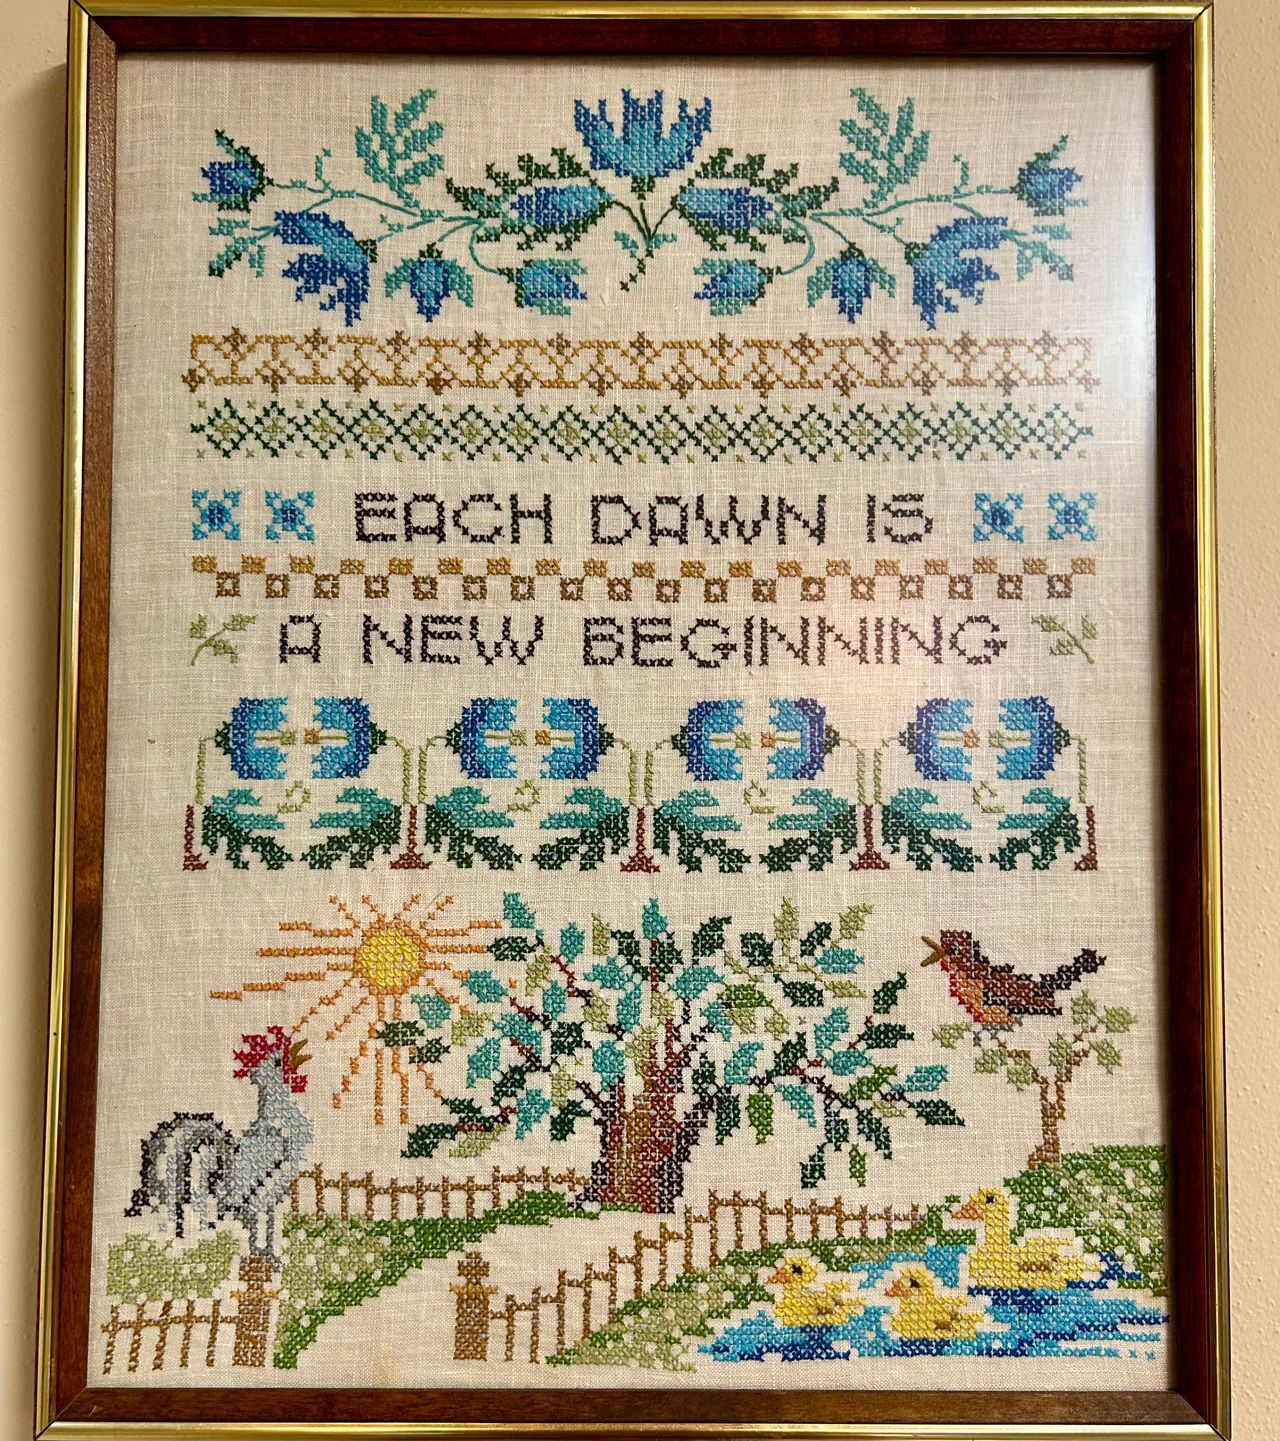 Each dawn is a new beginning. Sigh. I never tire of seeing this lovely cross-stitch piece and breathing in its hopeful saying.